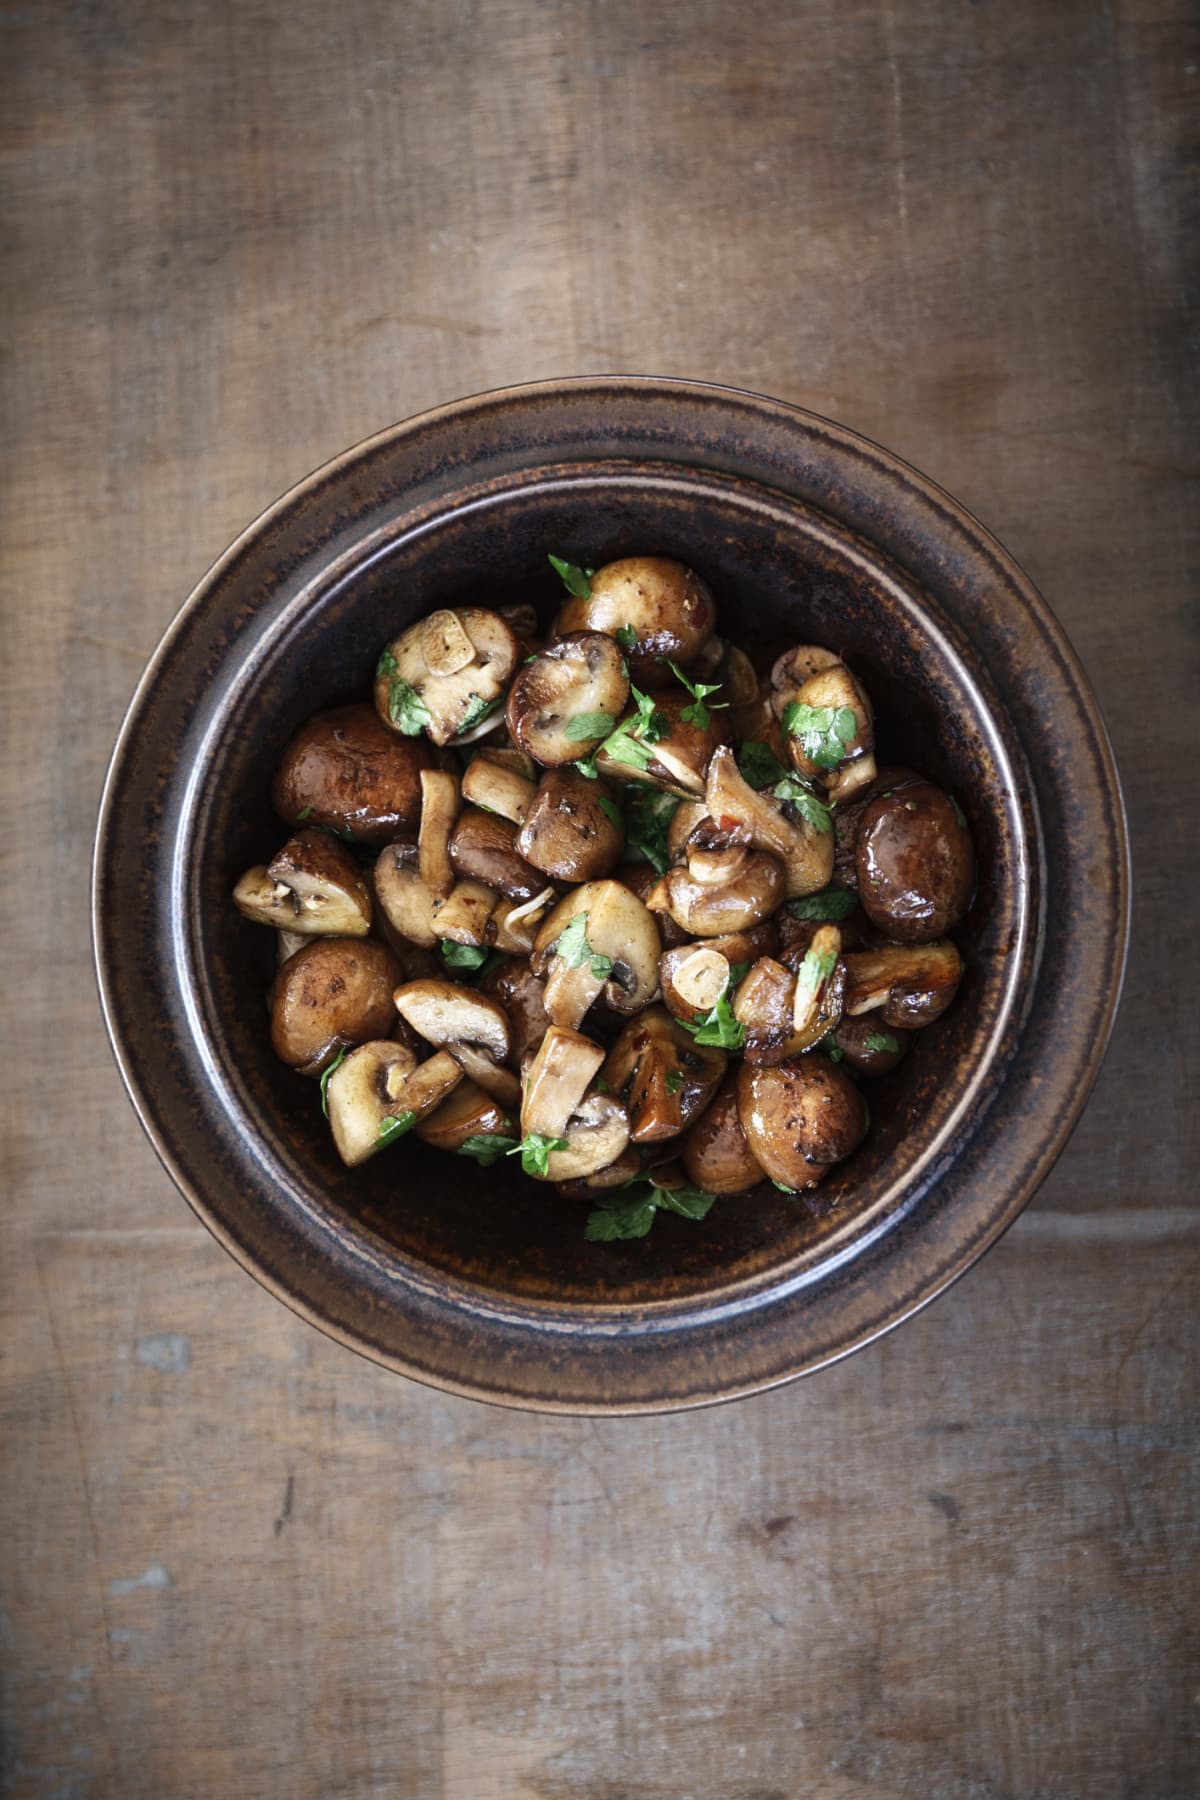 Bowl of mushrooms with fresh herb garnishes